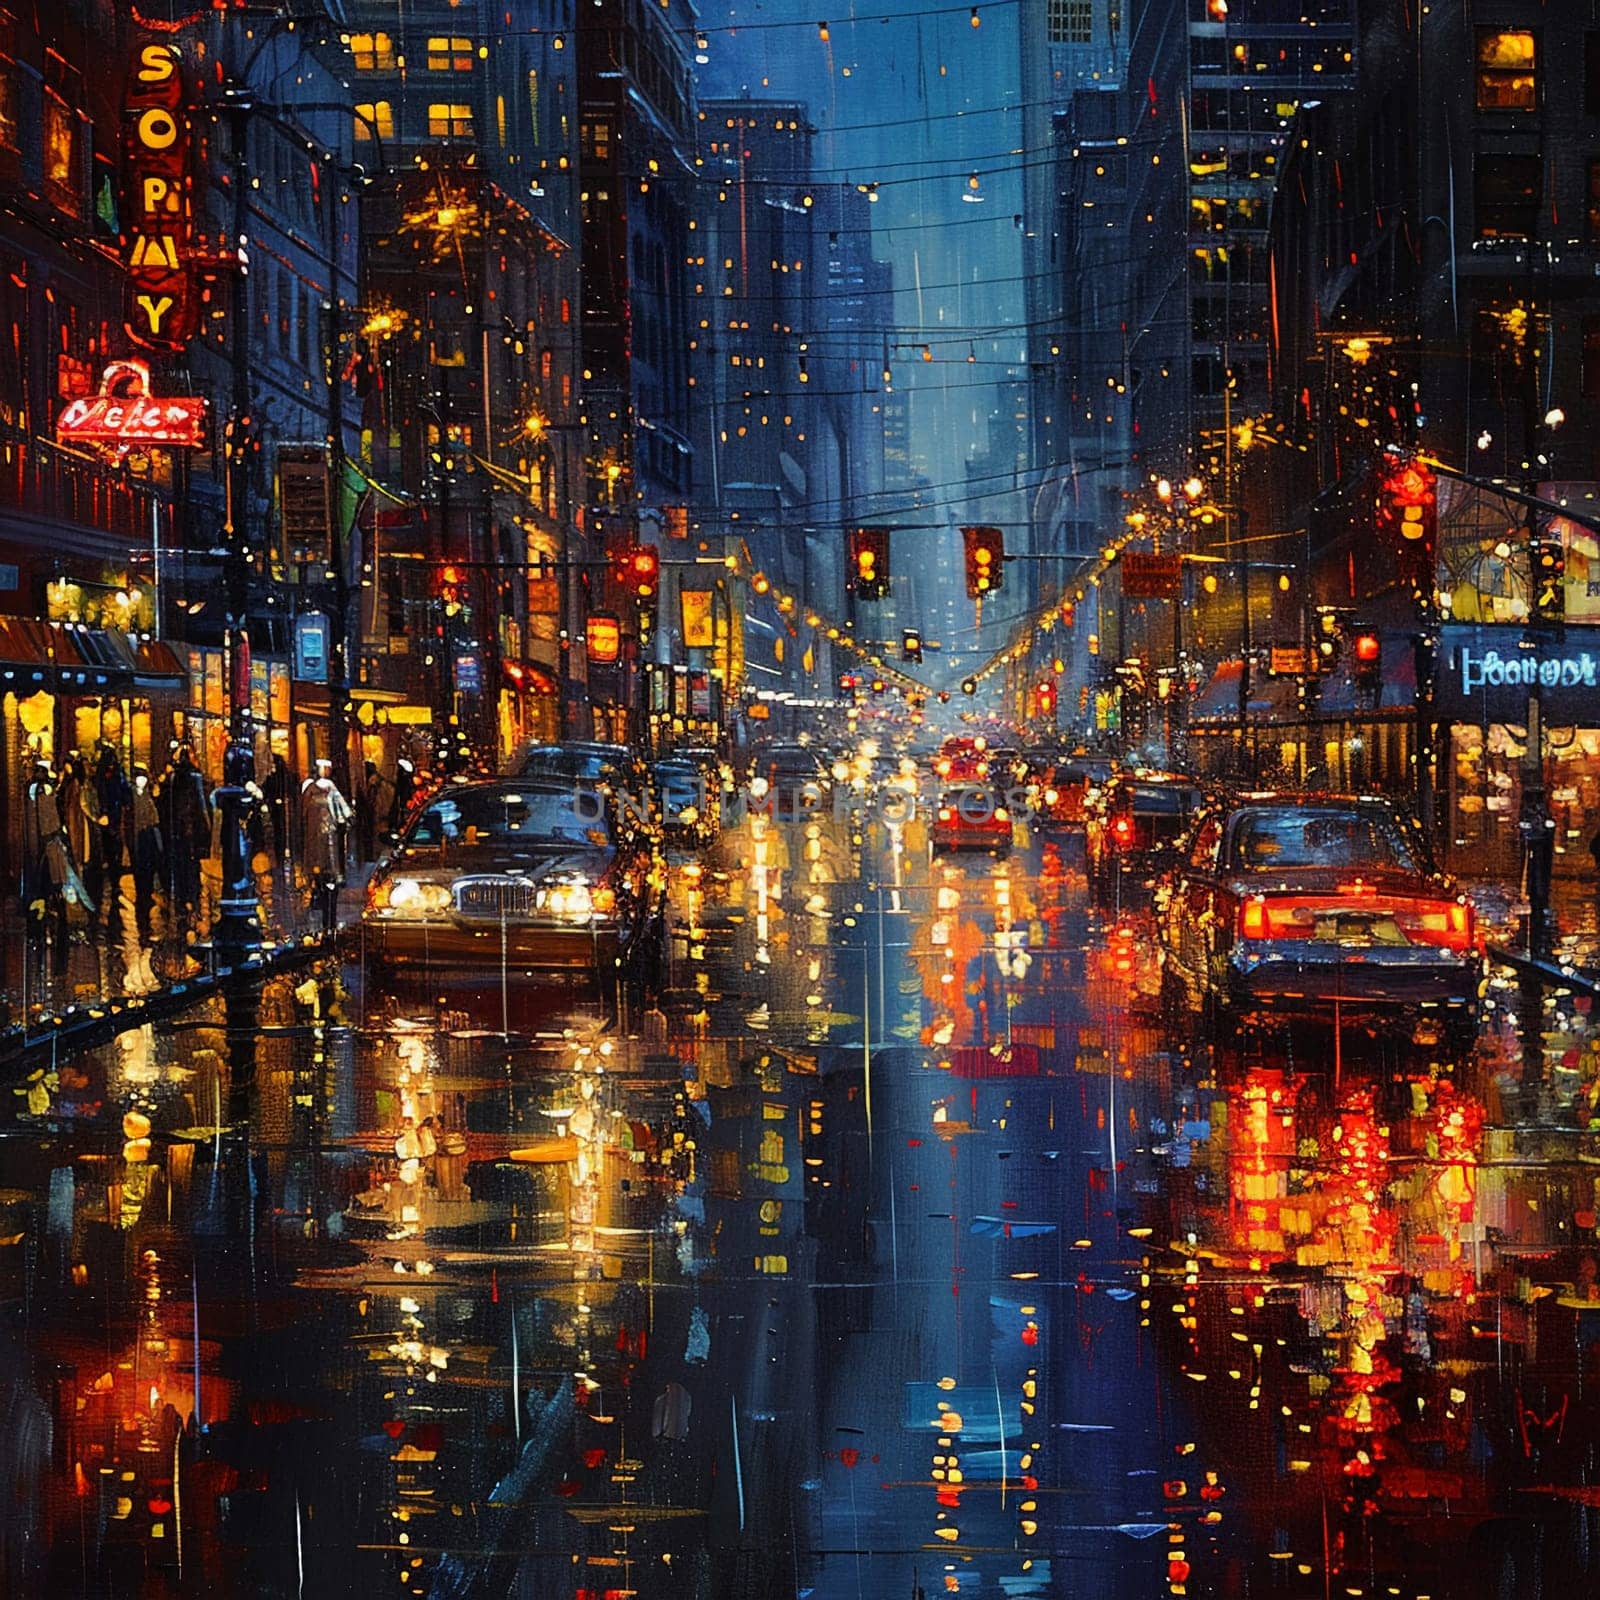 Rain-slicked urban street captured in glossy oil paints by Benzoix